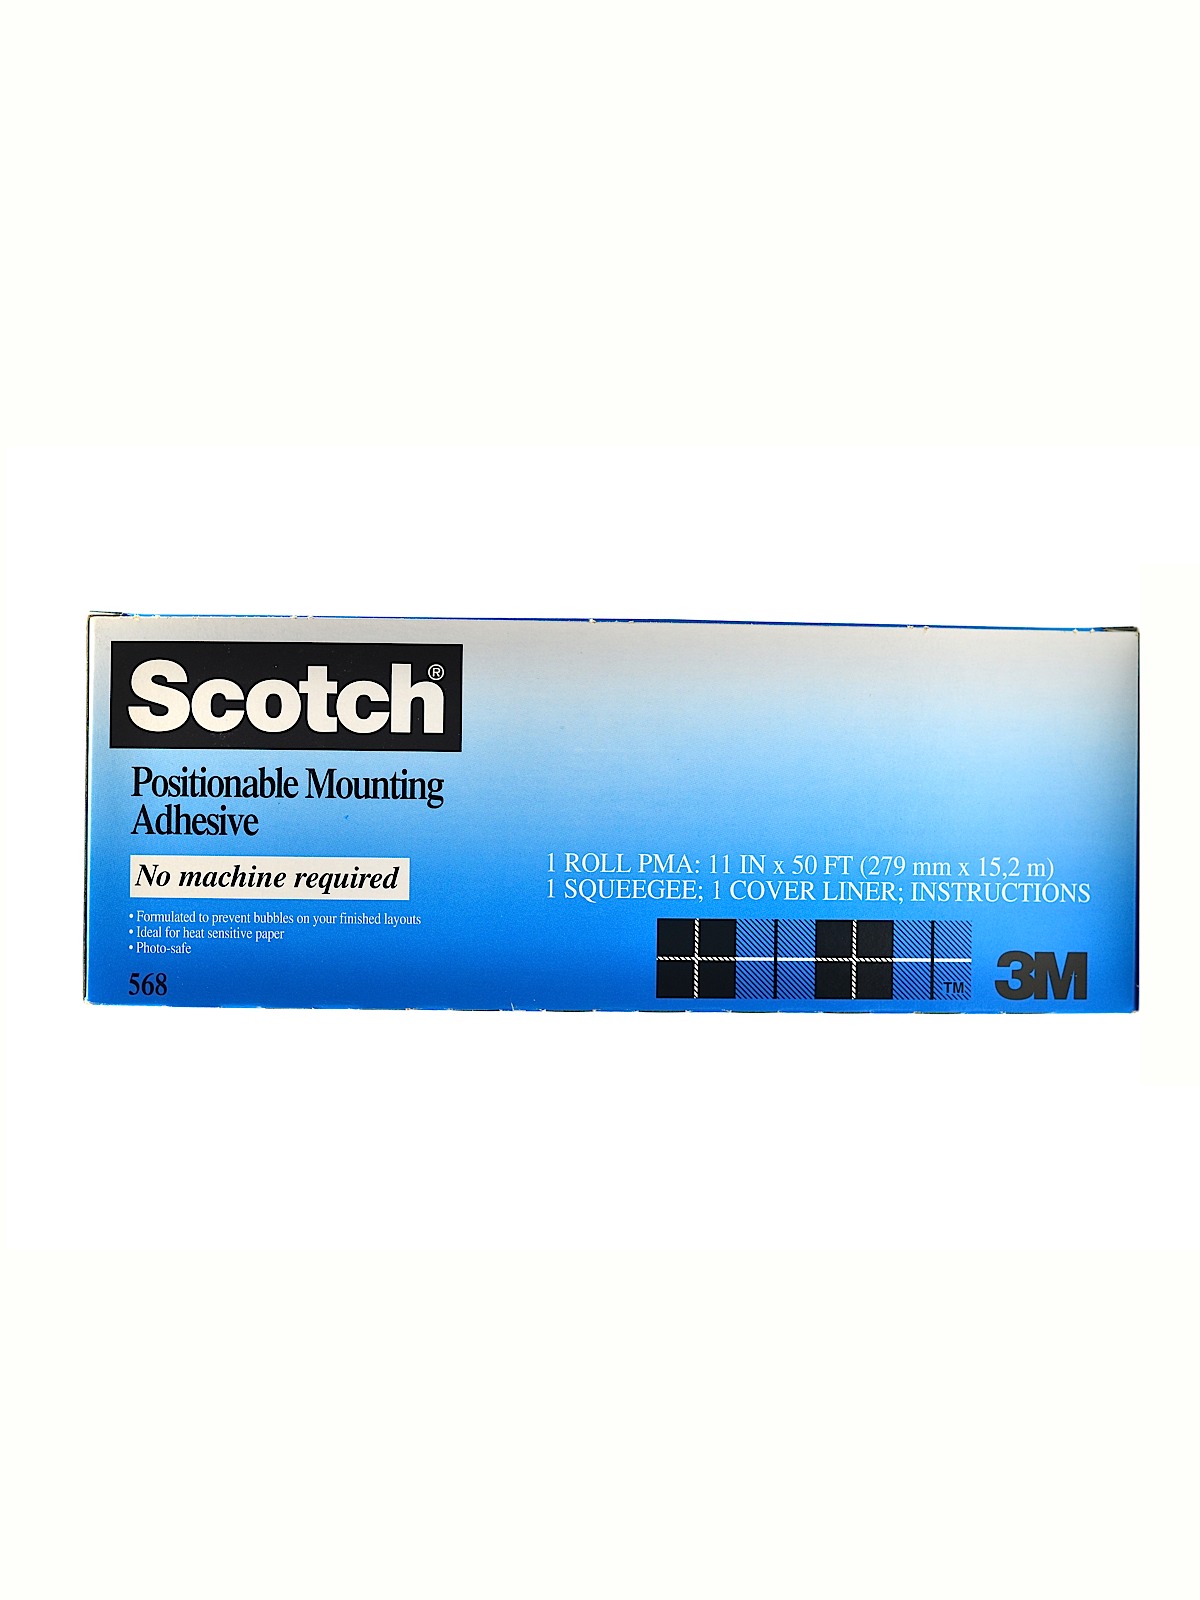 Positionable Mounting Adhesive 568 11 in. x 50 ft. 568